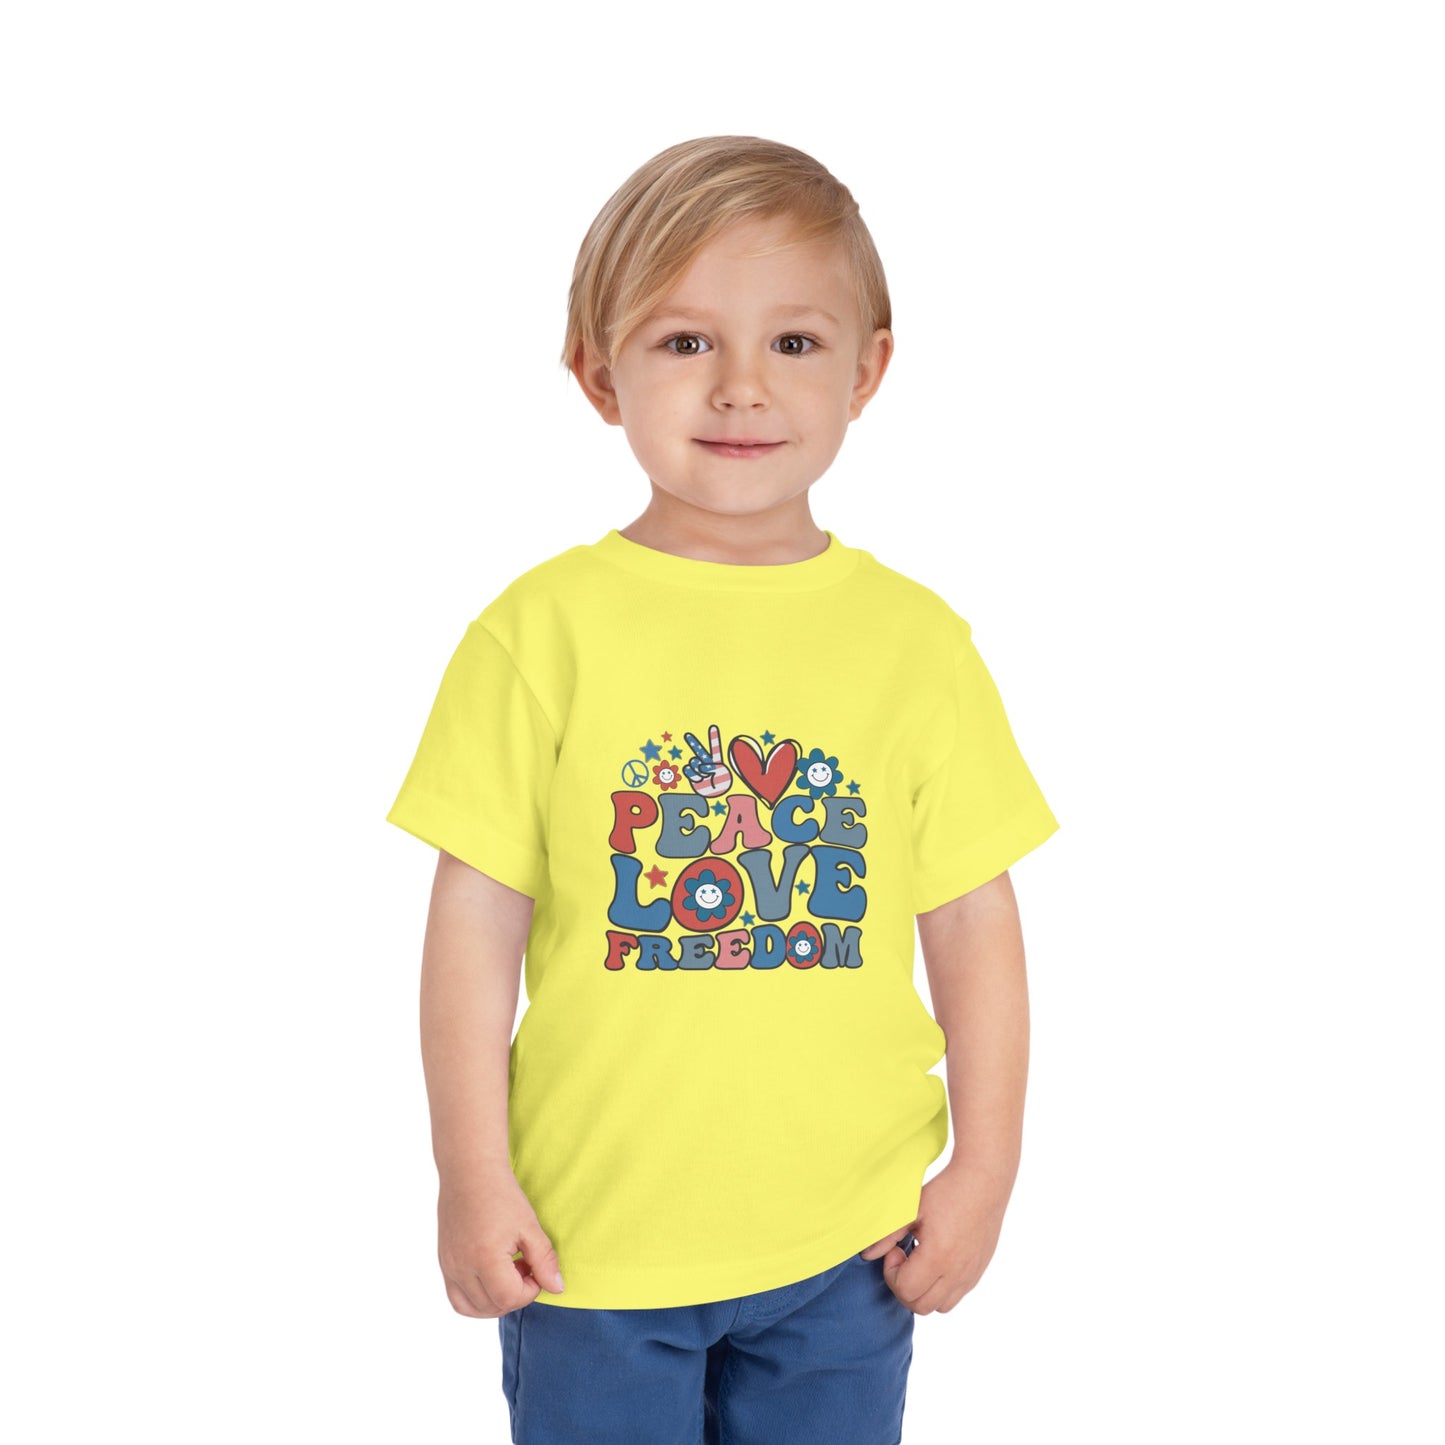 Peace Love Freedom 4th of July Toddler Short Sleeve Tee